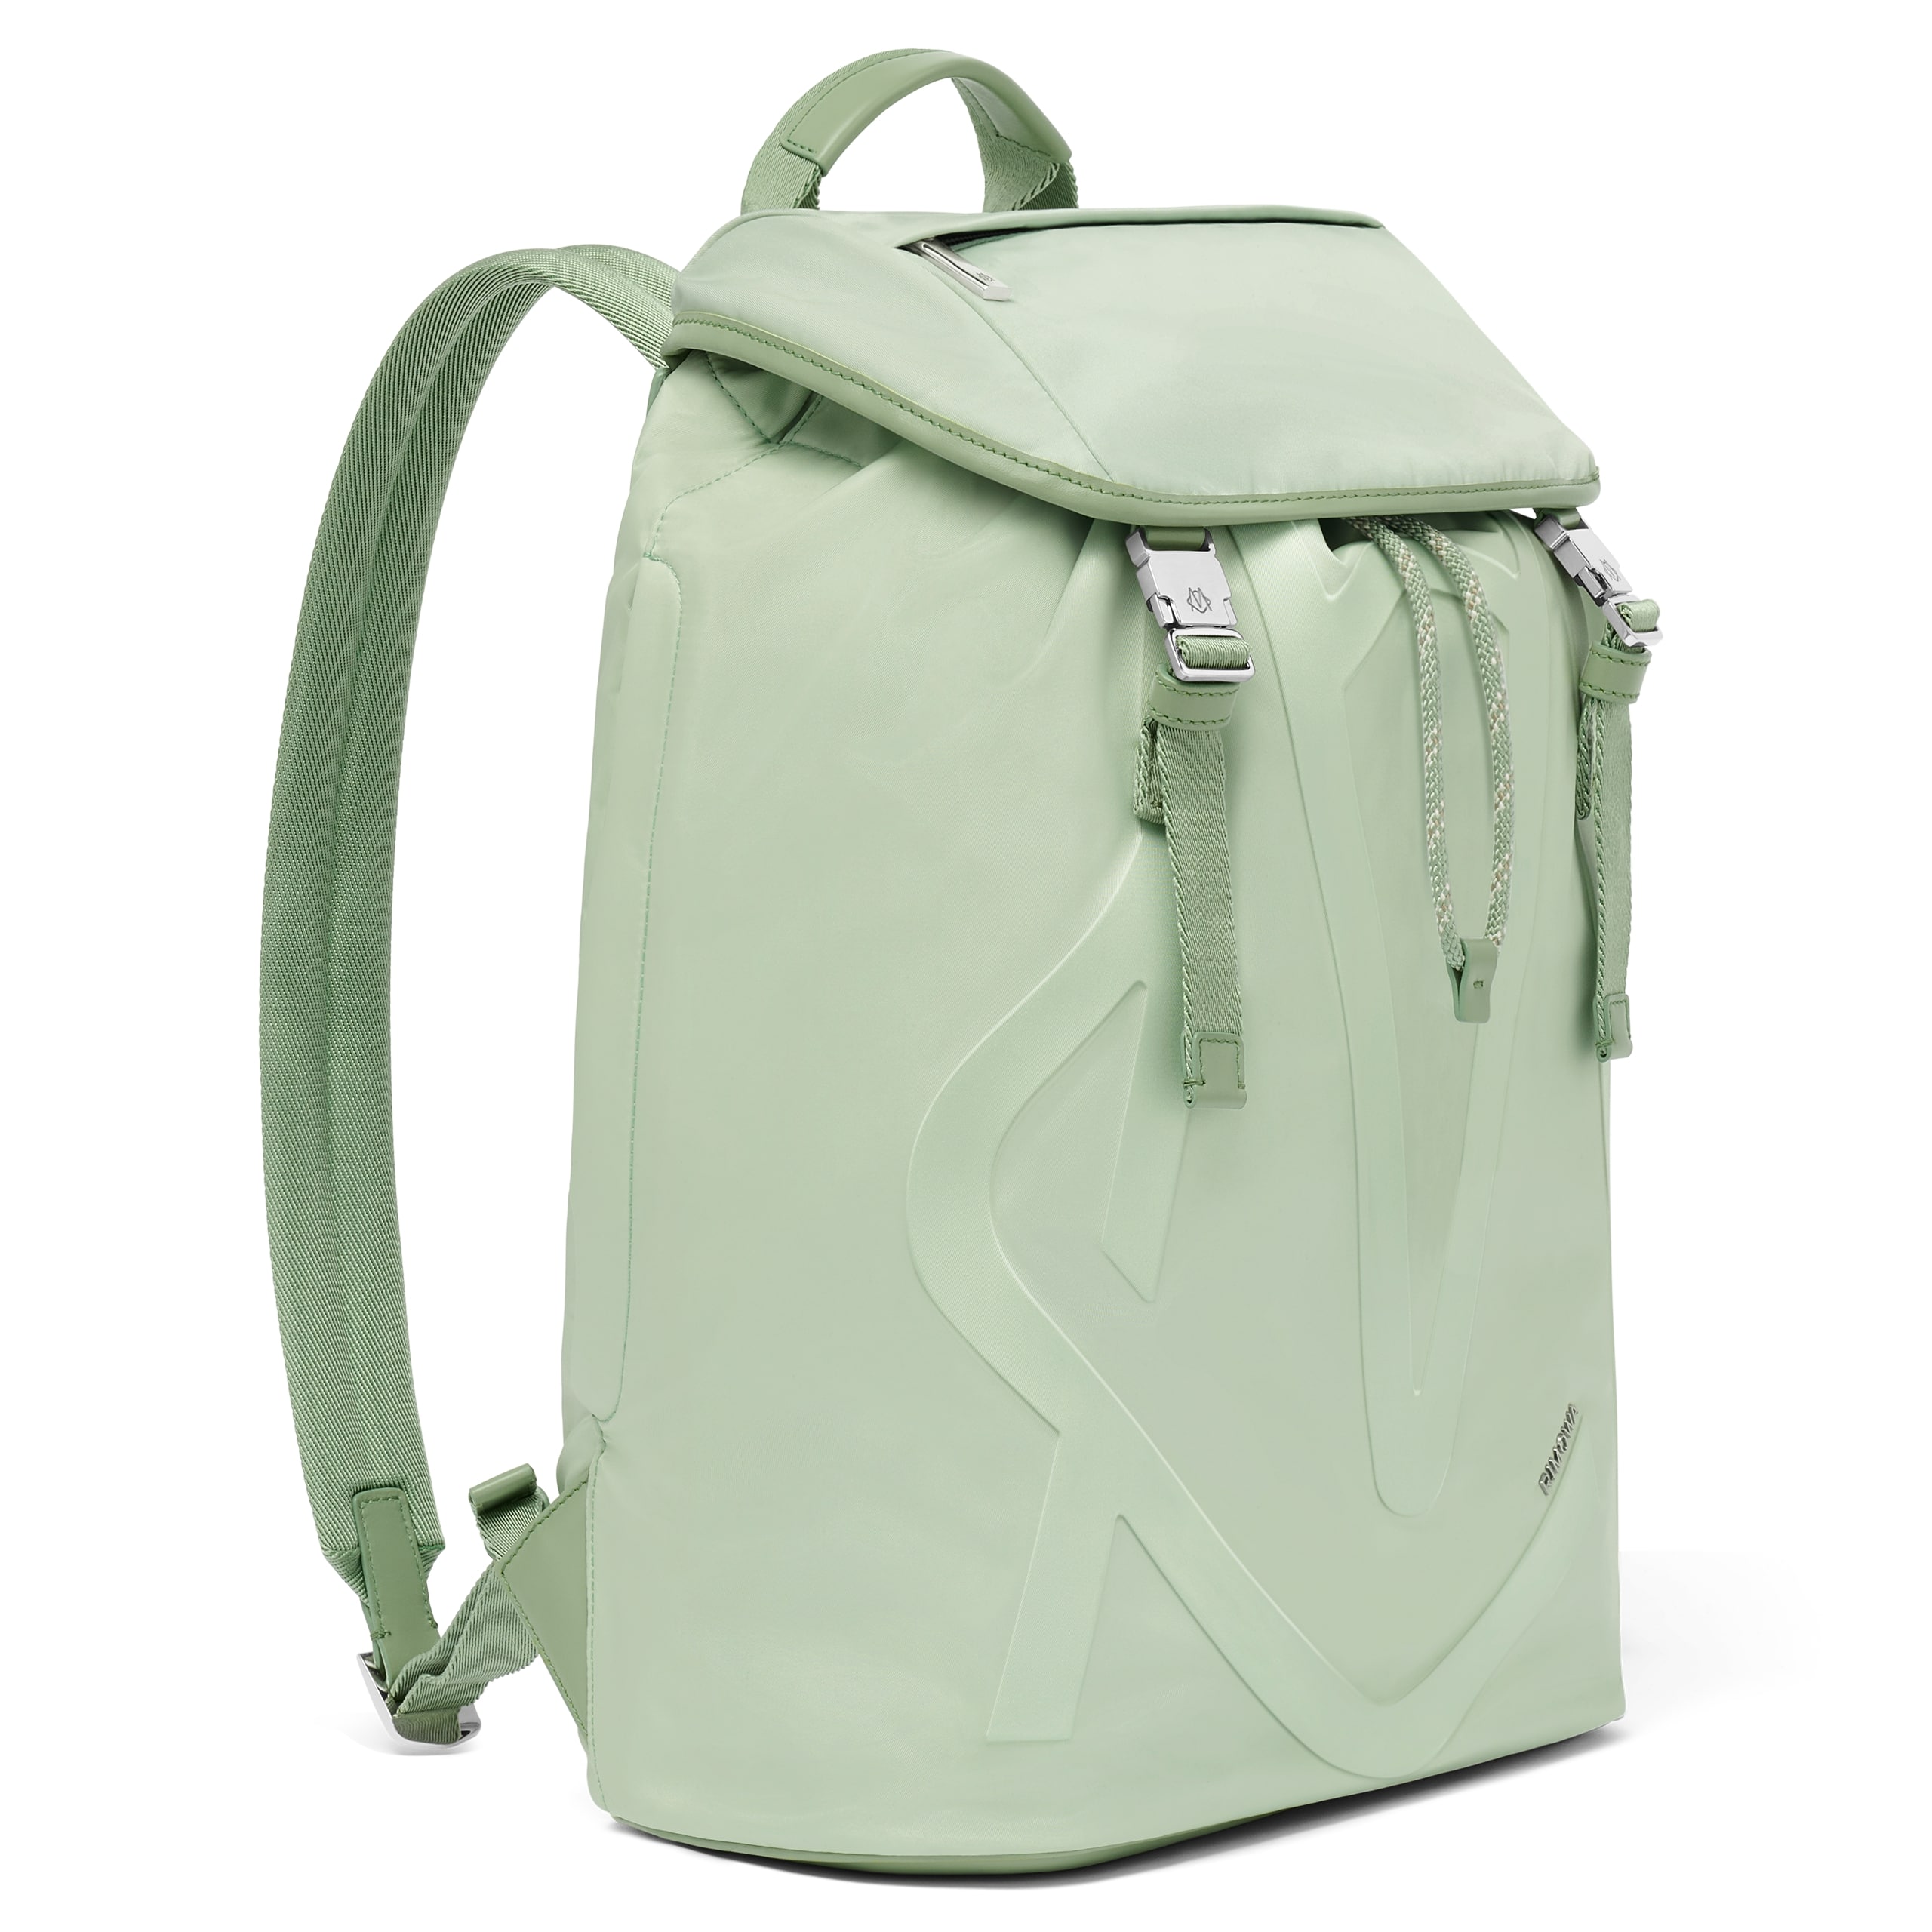 RIMOWA Signature Flap Backpack Large in Mint